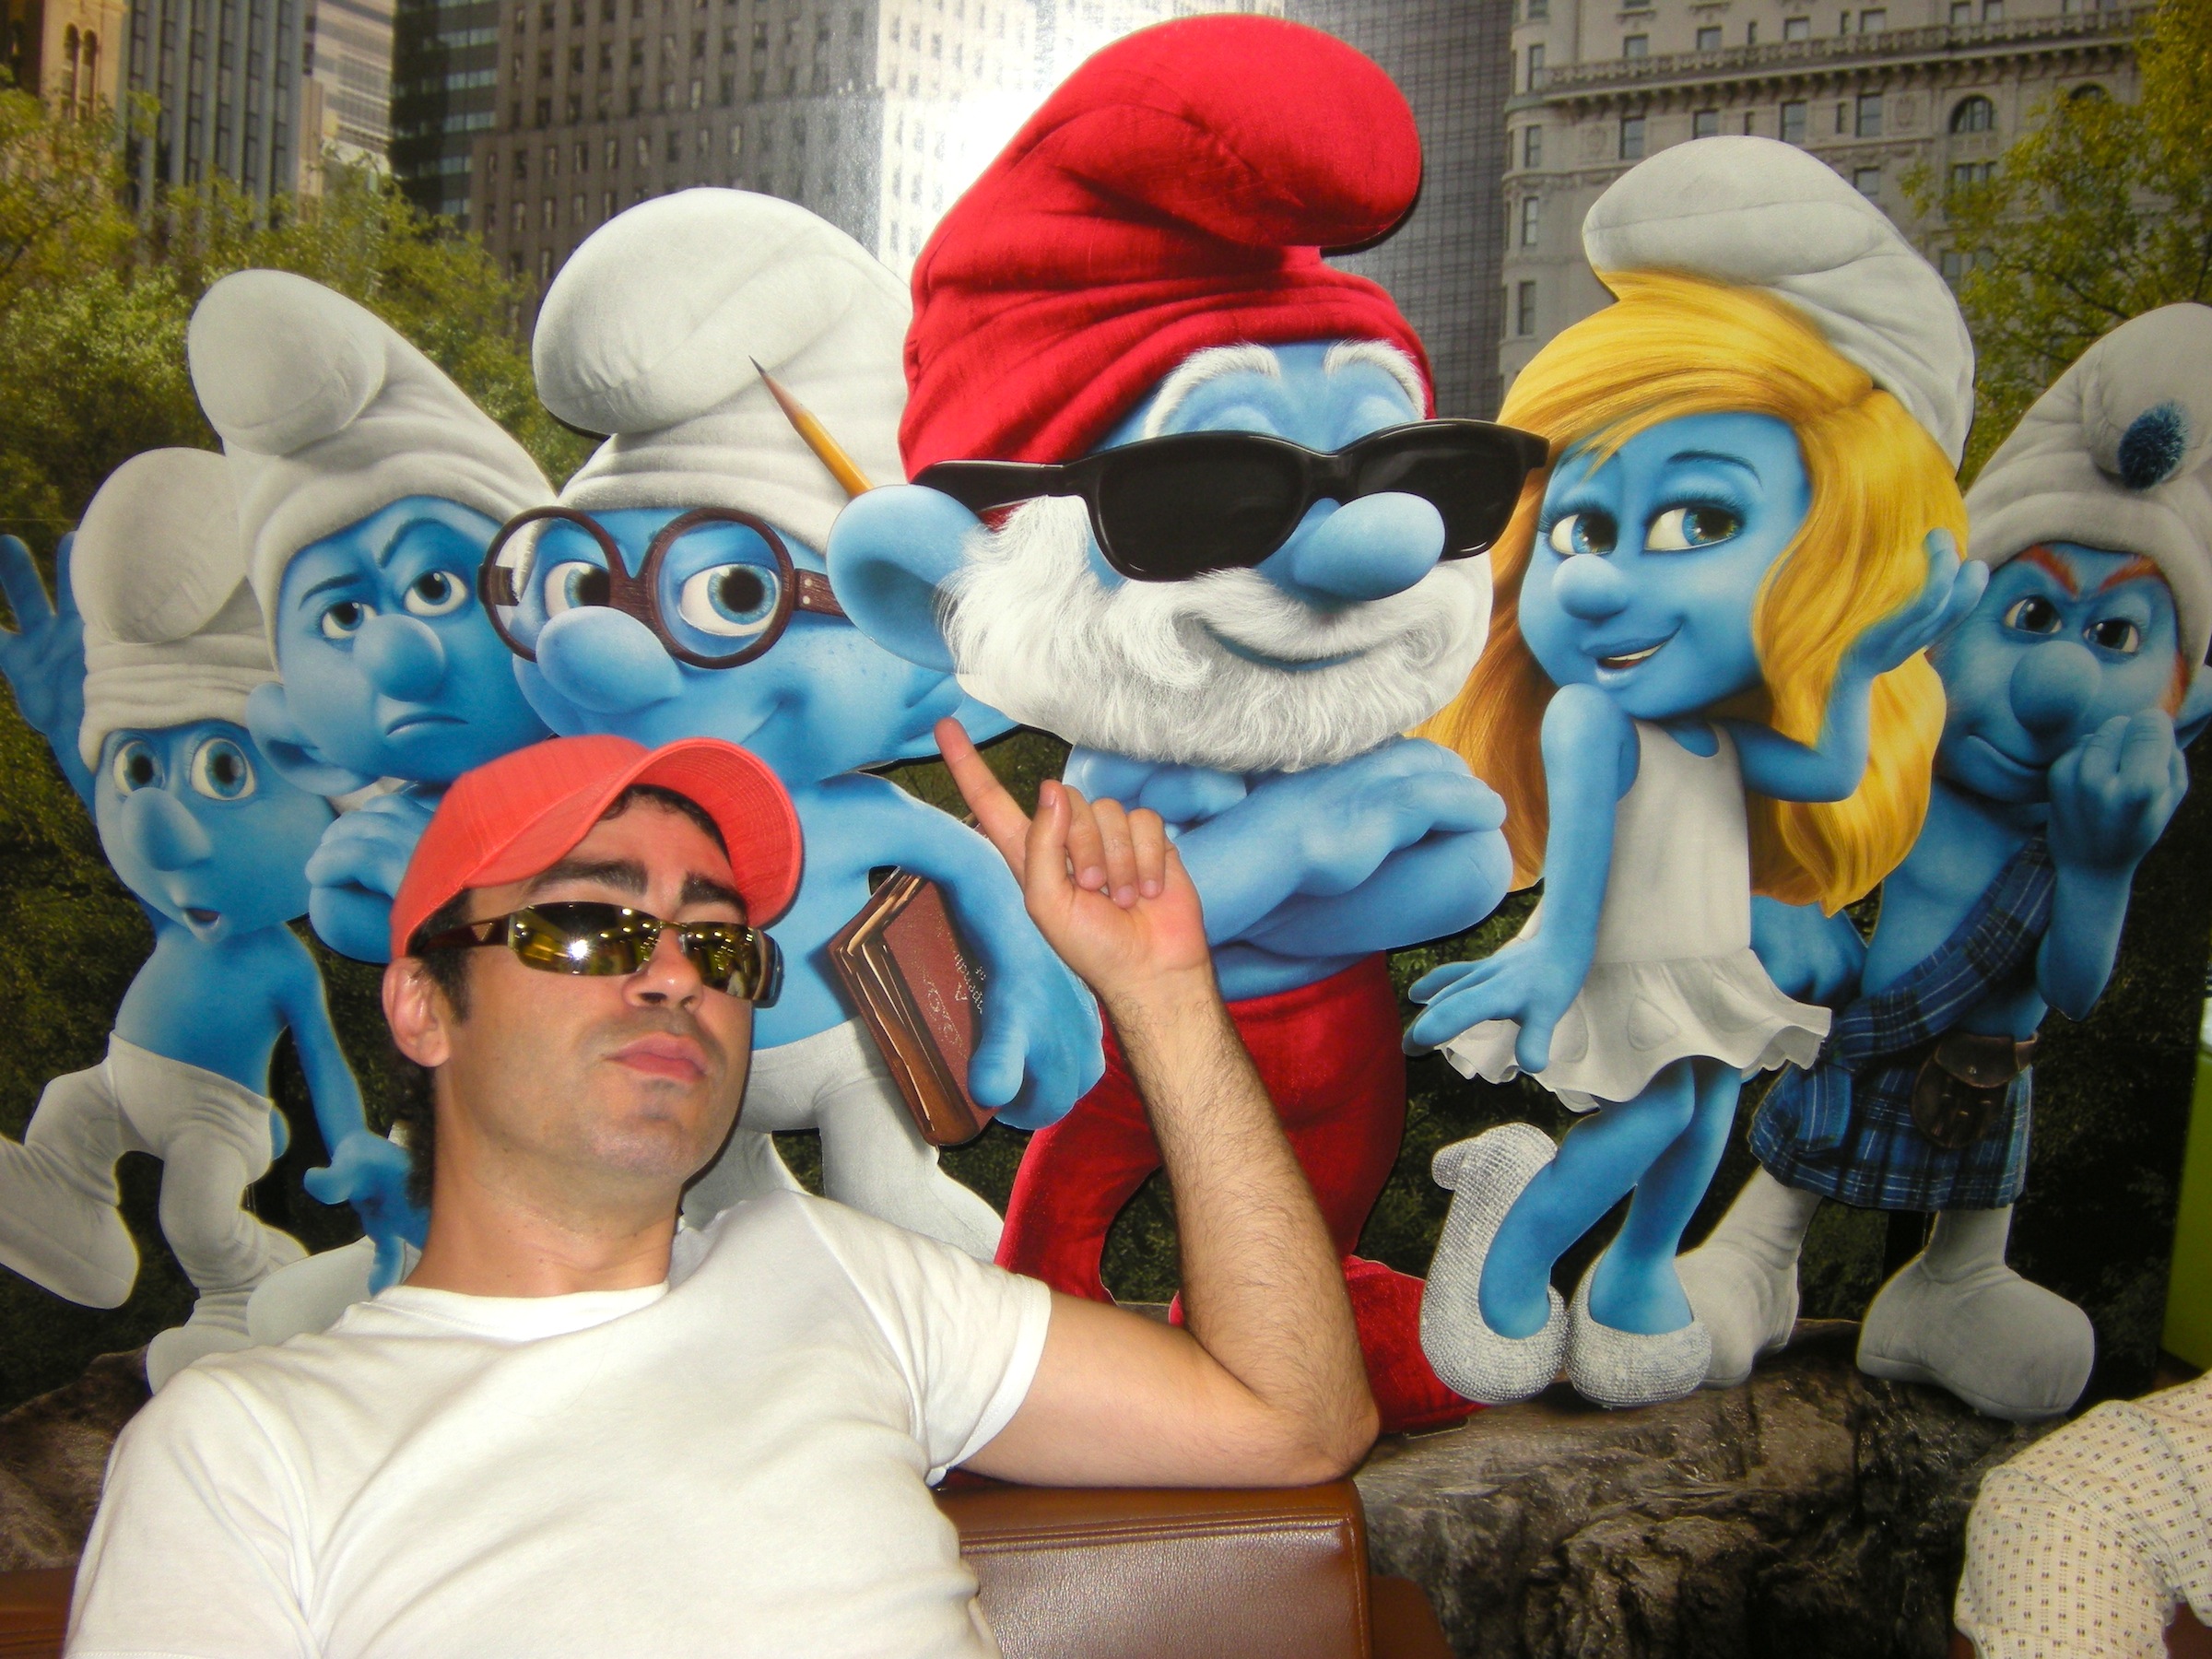 Milan Antonic (Brainy Smurf) at the Serbian premiere of The Smurfs (2011)